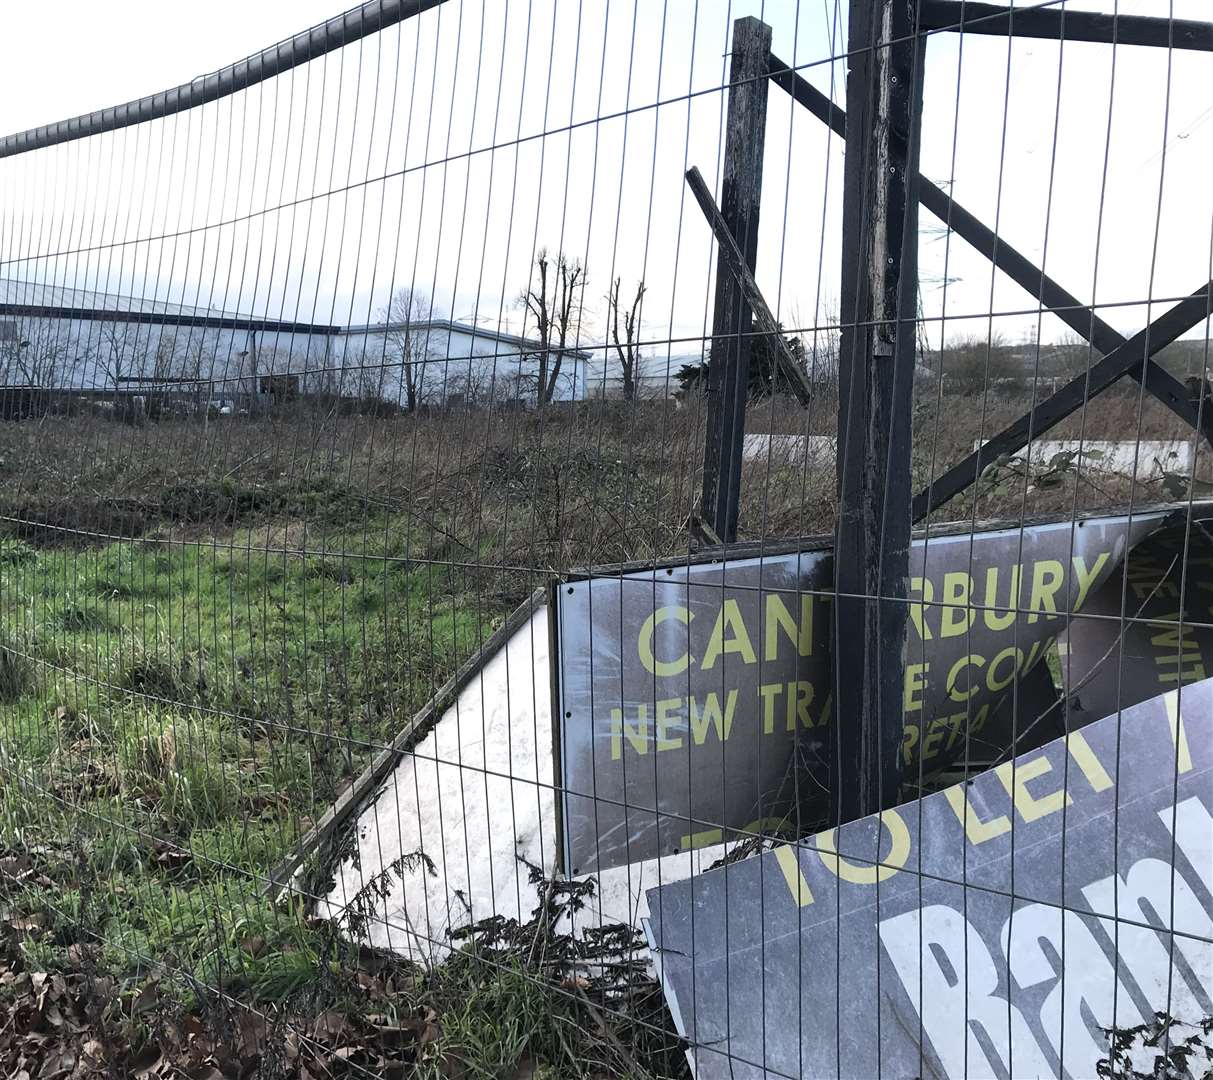 The site, which used to be part of the Southern Water sewage works, has long been a blot on Canterbury’s landscape